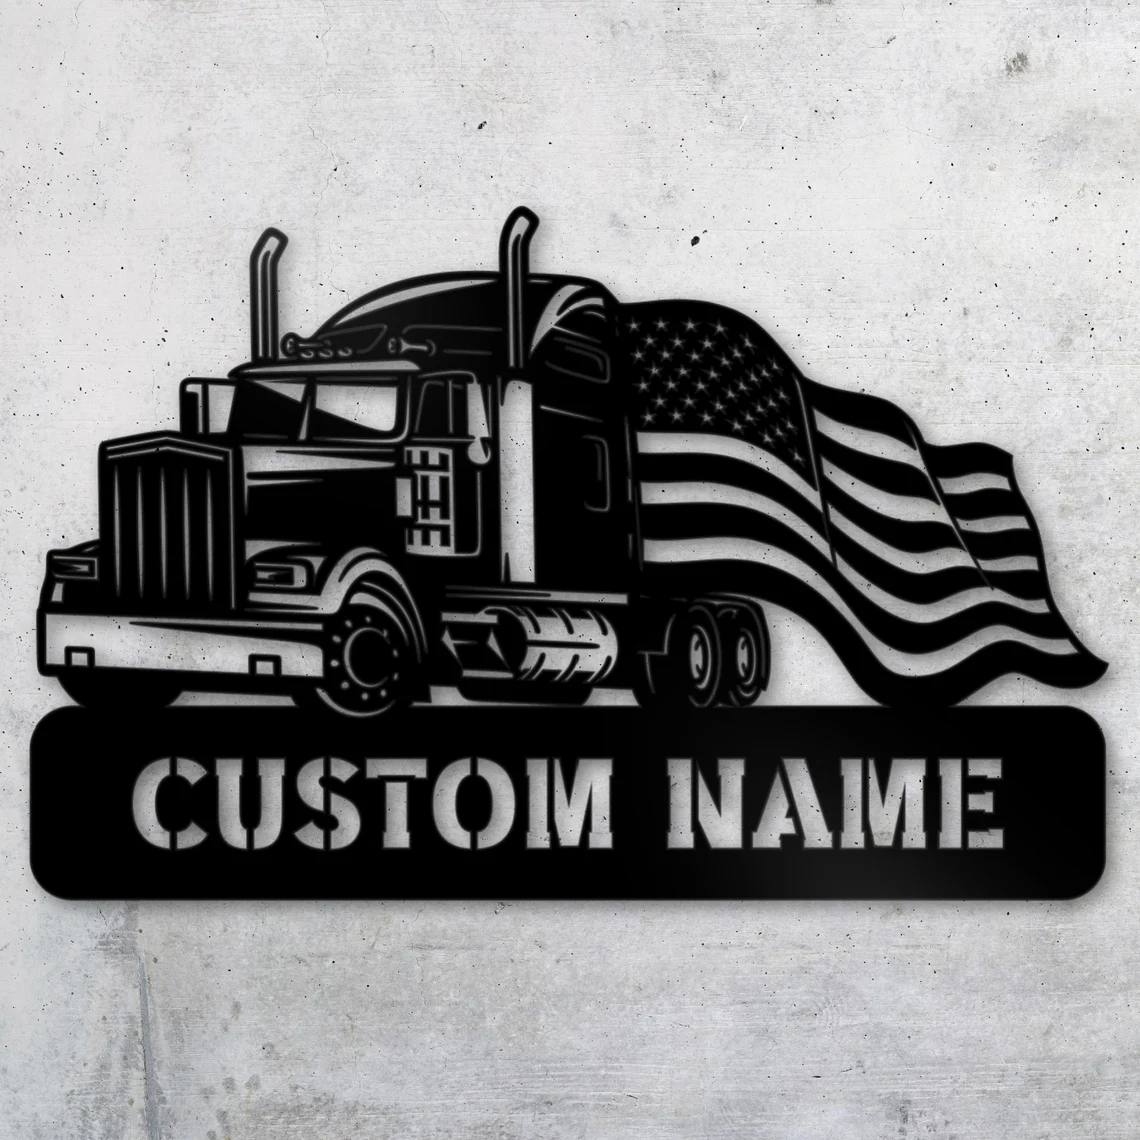 Now You Know What An AWESOME Trucker Looks Like American Flag Truck Driver  Gifts Vintage Trucker Design Sticker for Sale by DownHomeCrafts